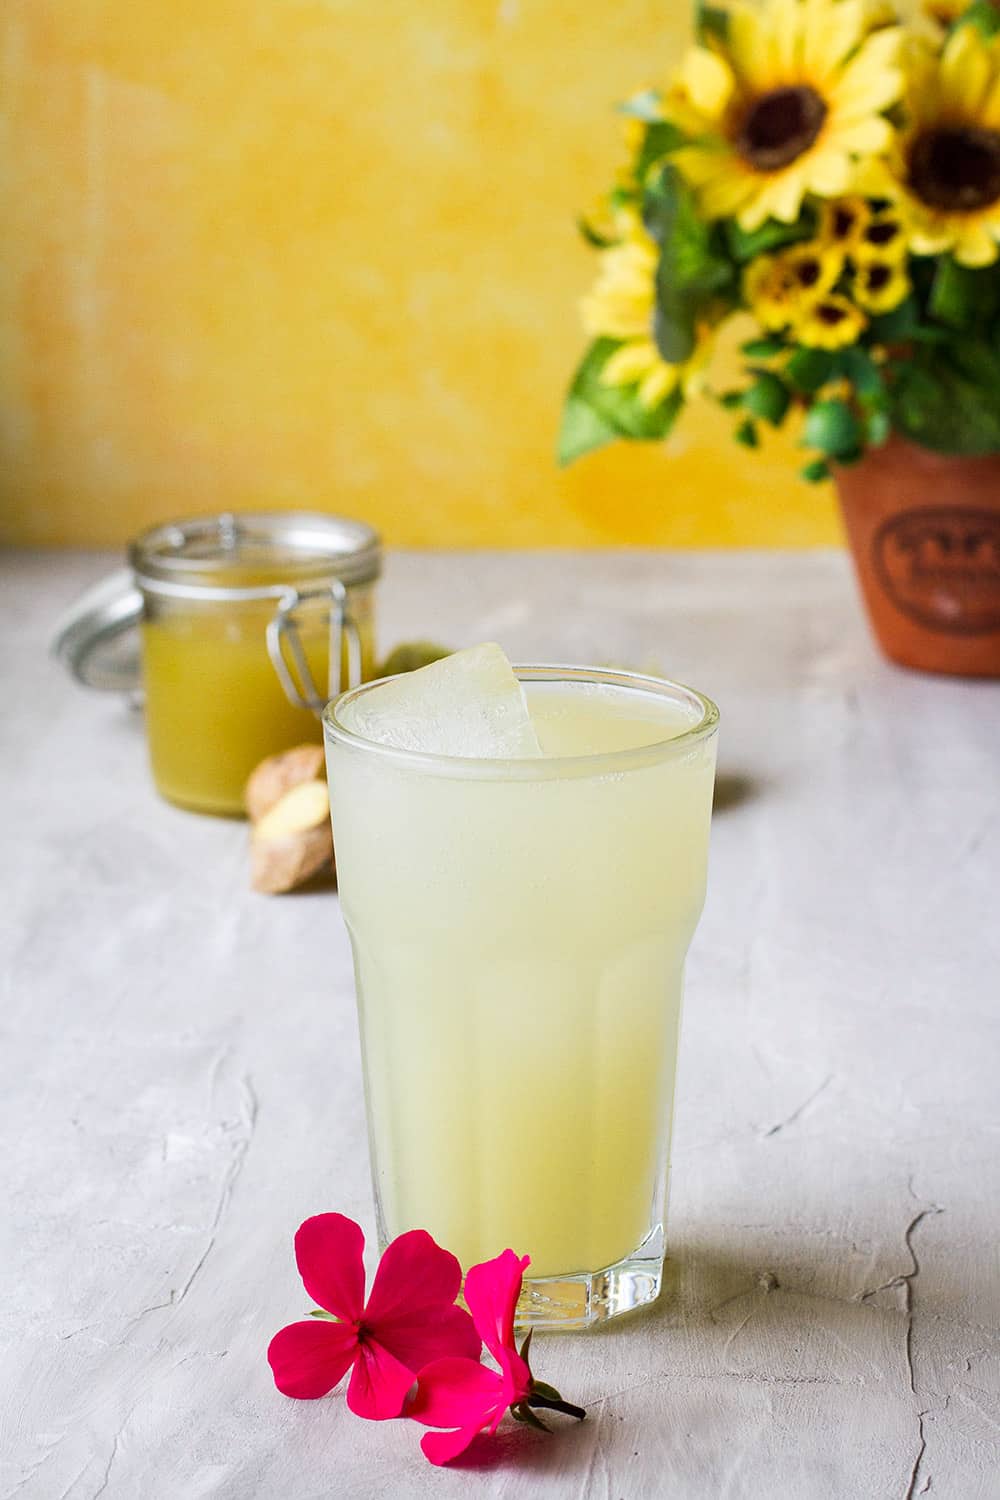 Homemade ginger beer in a large glass, pink flower in the foreground and yellow background.